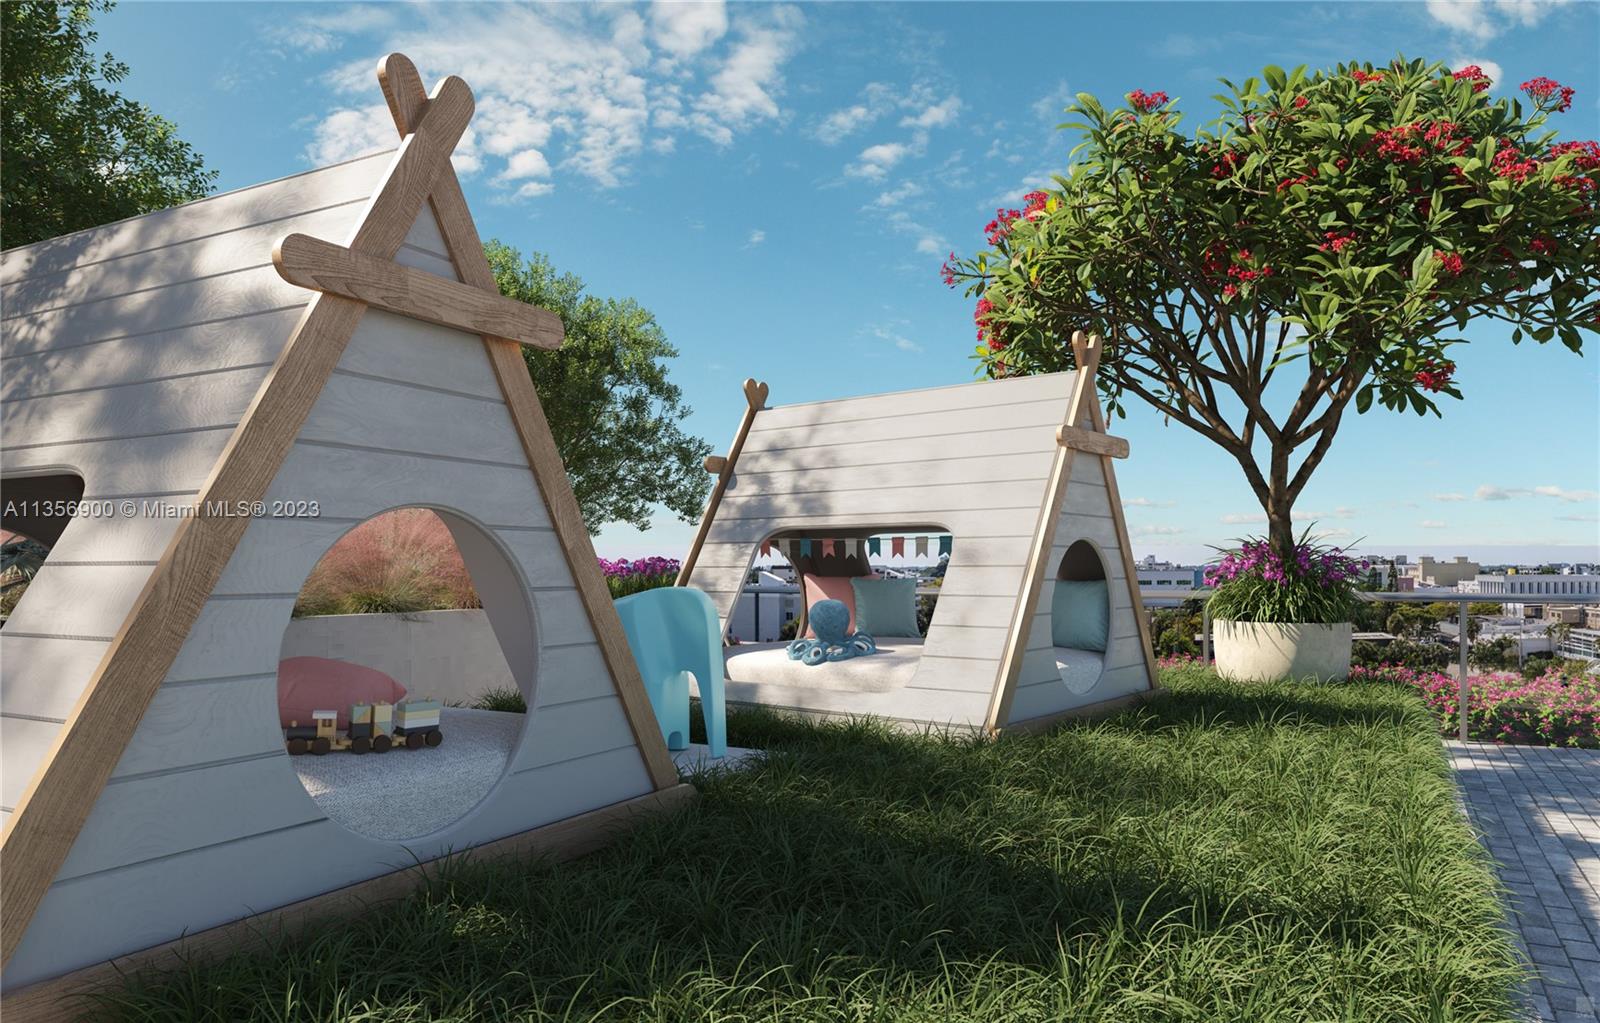 Rooftop Kids Play Tents